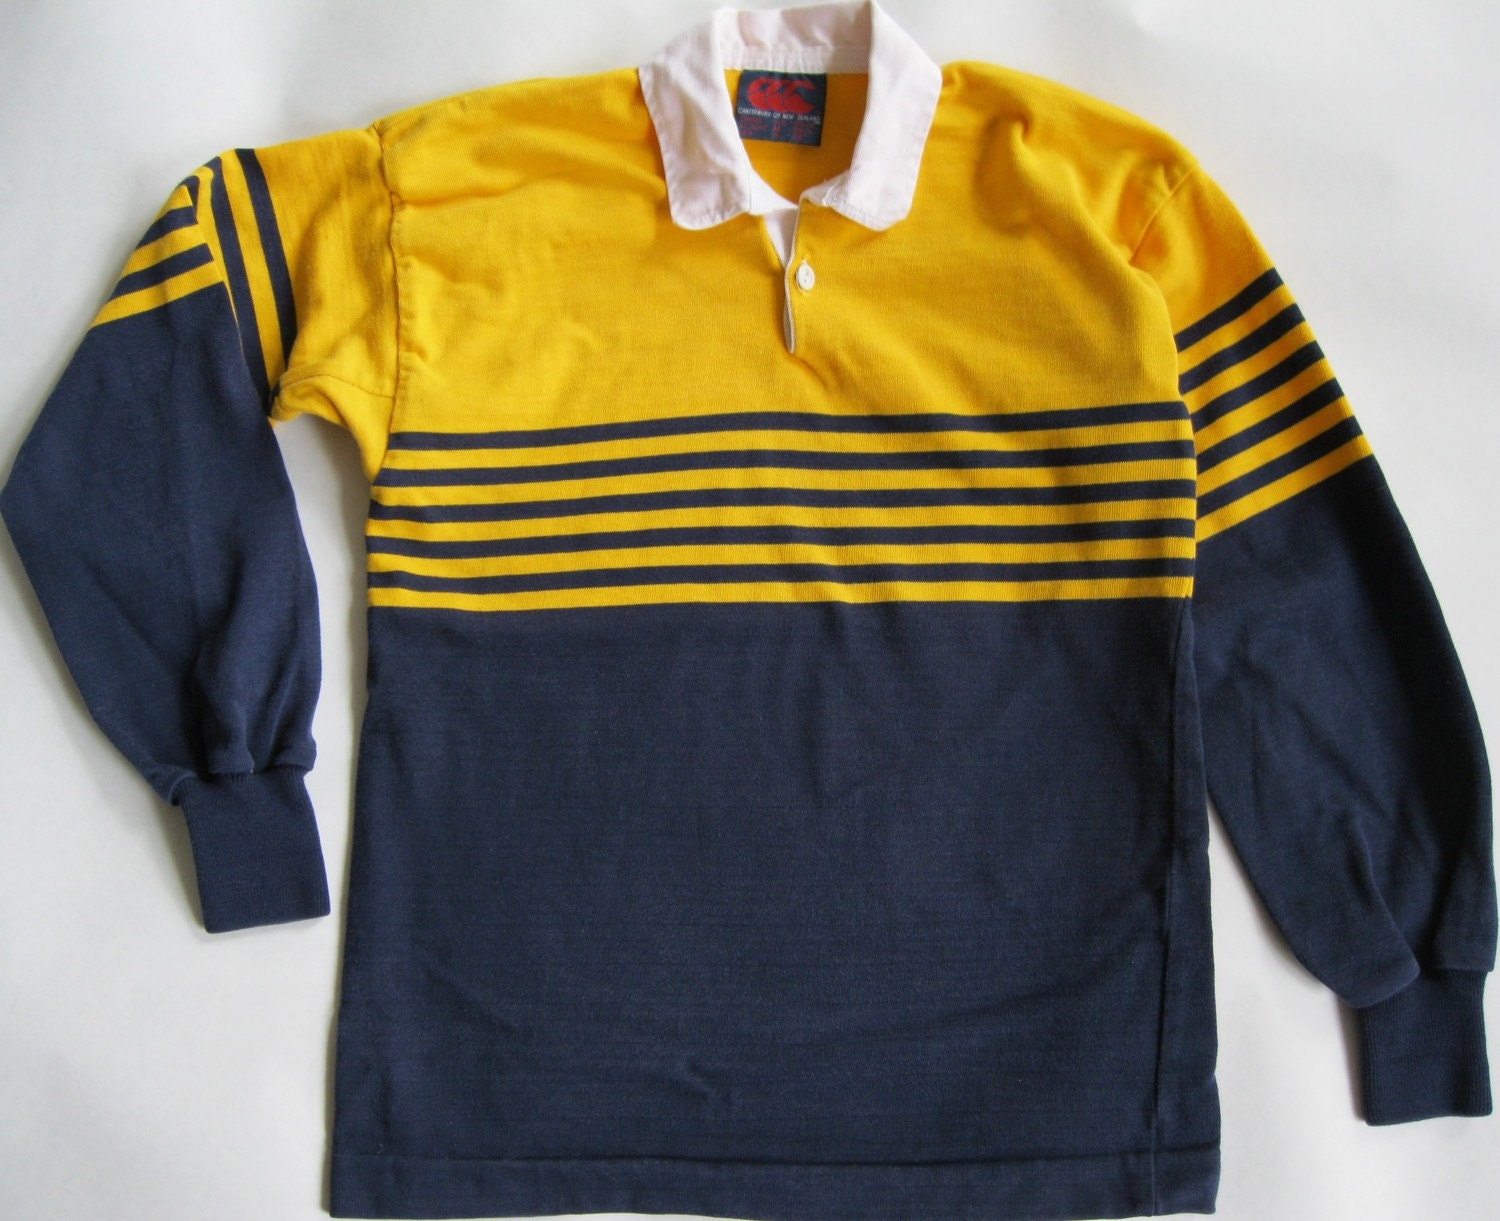 1980's men's vintage rugby shirt in yellow navy blue